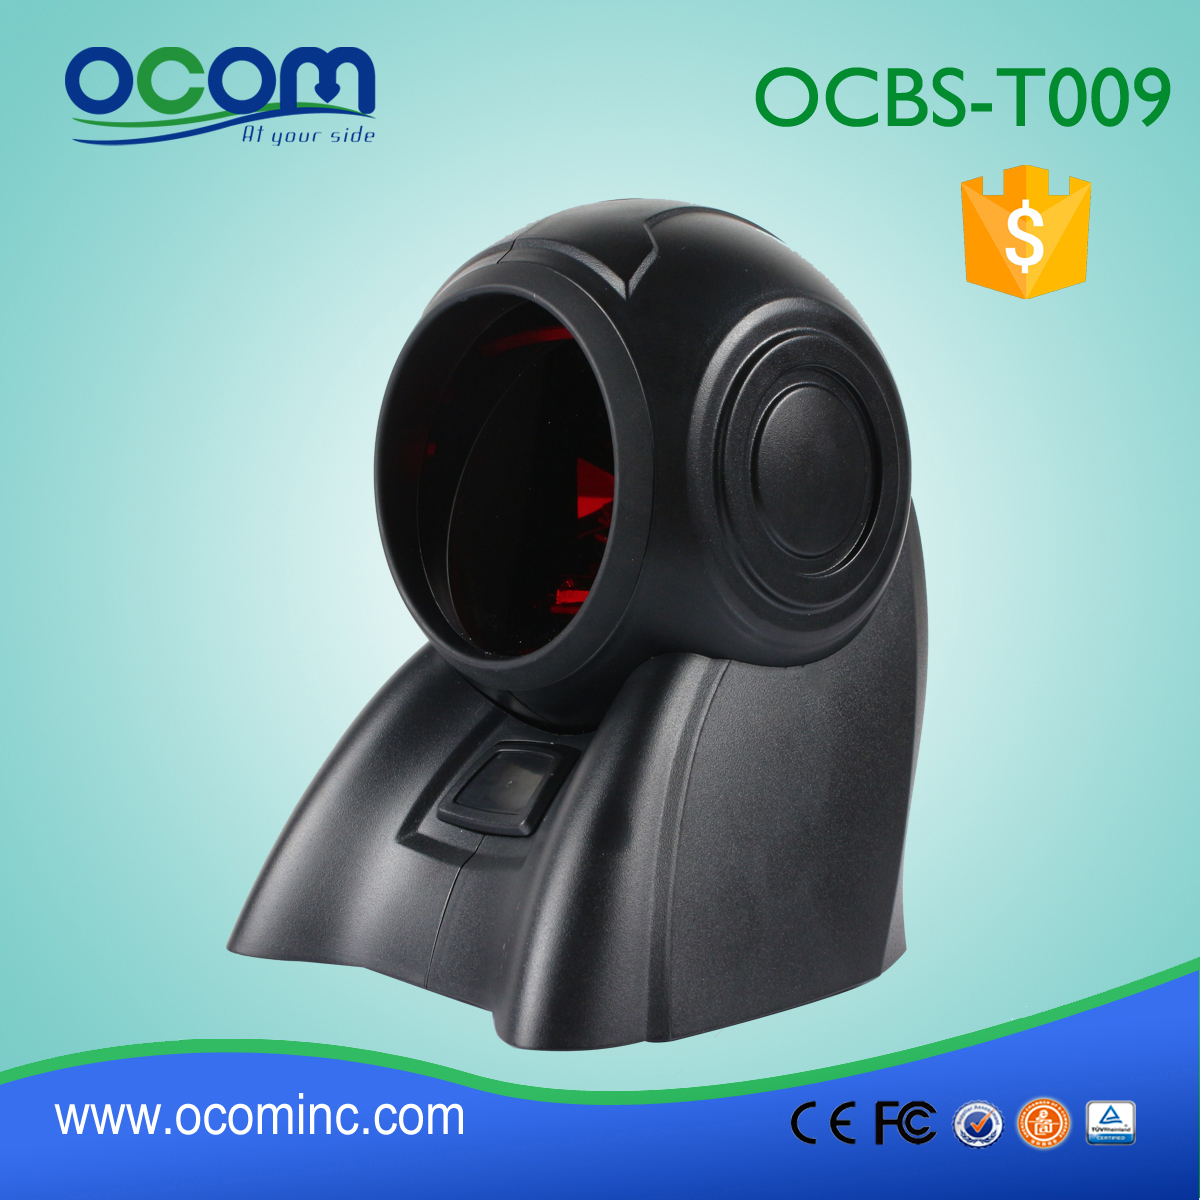 (OCBS-T009)Classic Omni Directional 1D Laser Barcode Scanner